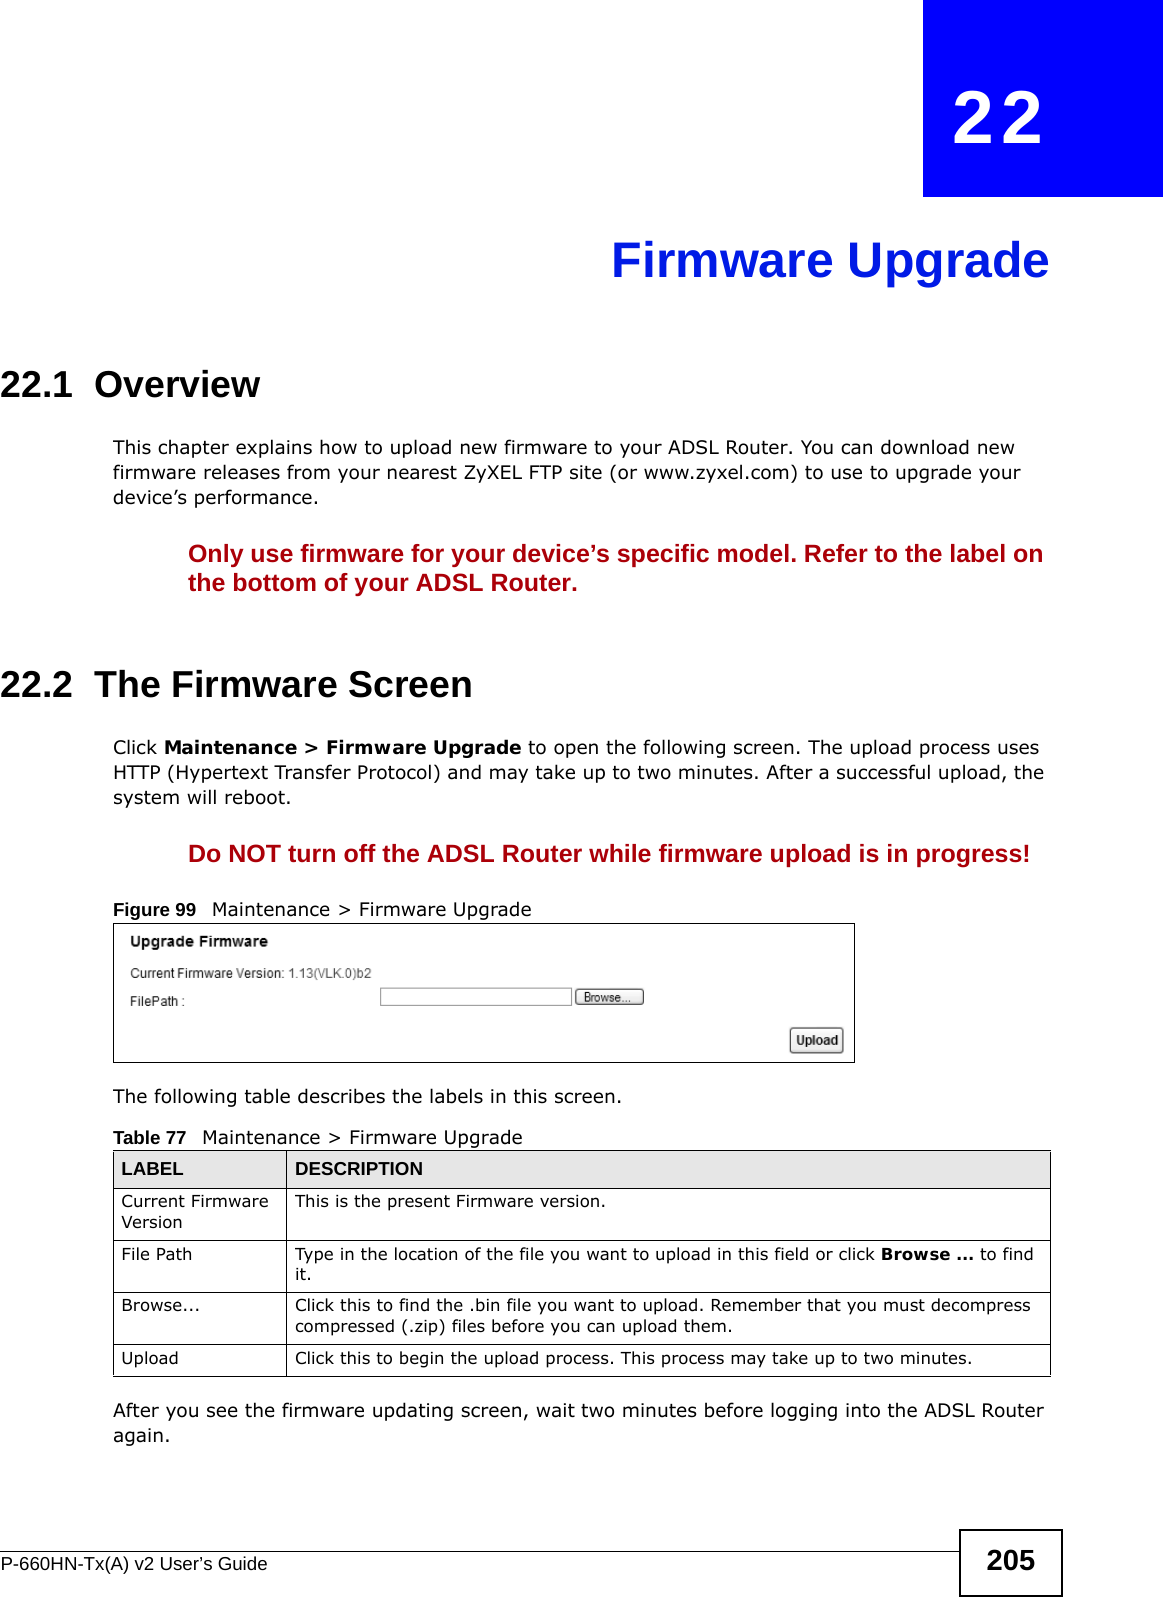 P-660HN-Tx(A) v2 User’s Guide 205CHAPTER   22Firmware Upgrade22.1  OverviewThis chapter explains how to upload new firmware to your ADSL Router. You can download new firmware releases from your nearest ZyXEL FTP site (or www.zyxel.com) to use to upgrade your device’s performance.Only use firmware for your device’s specific model. Refer to the label on the bottom of your ADSL Router.22.2  The Firmware ScreenClick Maintenance &gt; Firmware Upgrade to open the following screen. The upload process uses HTTP (Hypertext Transfer Protocol) and may take up to two minutes. After a successful upload, the system will reboot. Do NOT turn off the ADSL Router while firmware upload is in progress!Figure 99   Maintenance &gt; Firmware UpgradeThe following table describes the labels in this screen. After you see the firmware updating screen, wait two minutes before logging into the ADSL Router again. Table 77   Maintenance &gt; Firmware UpgradeLABEL DESCRIPTIONCurrent Firmware VersionThis is the present Firmware version. File Path Type in the location of the file you want to upload in this field or click Browse ... to find it.Browse...  Click this to find the .bin file you want to upload. Remember that you must decompress compressed (.zip) files before you can upload them. Upload  Click this to begin the upload process. This process may take up to two minutes.